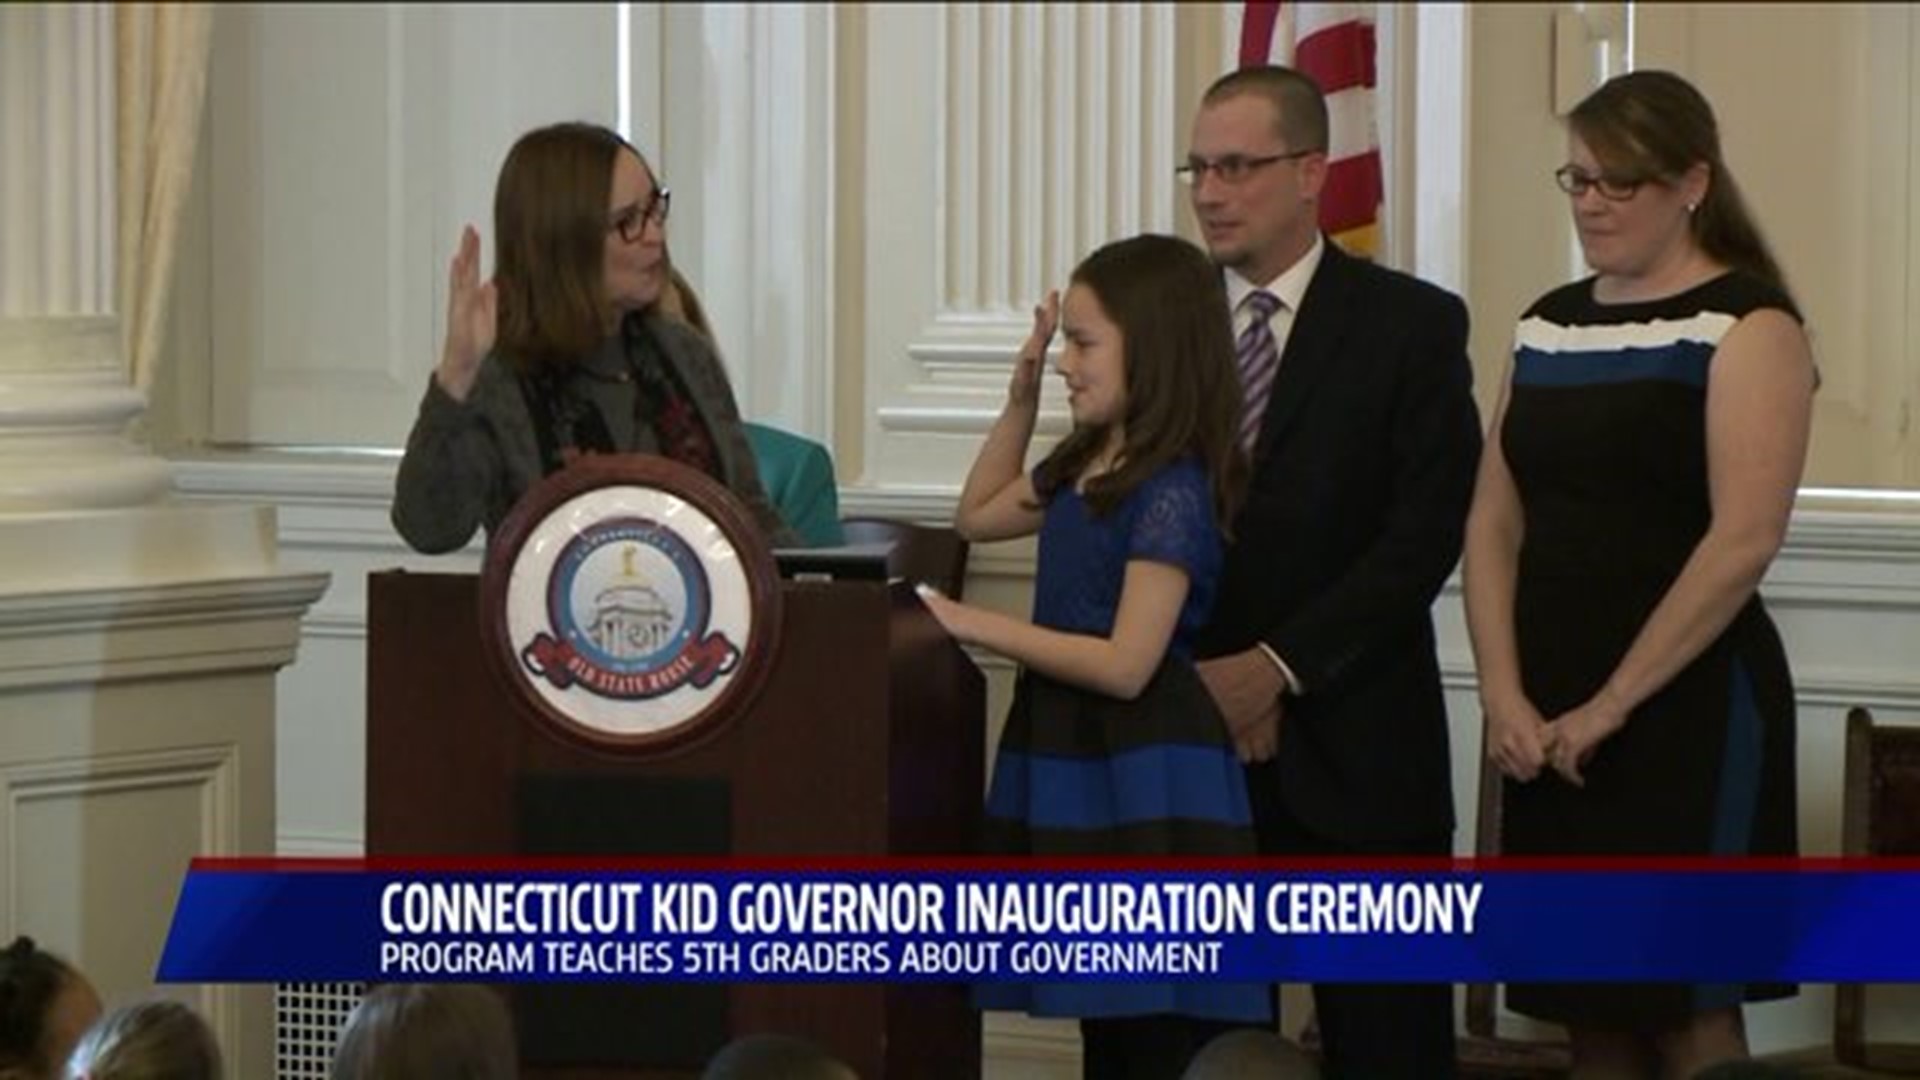 Kid governor inaugurated at state Capitol